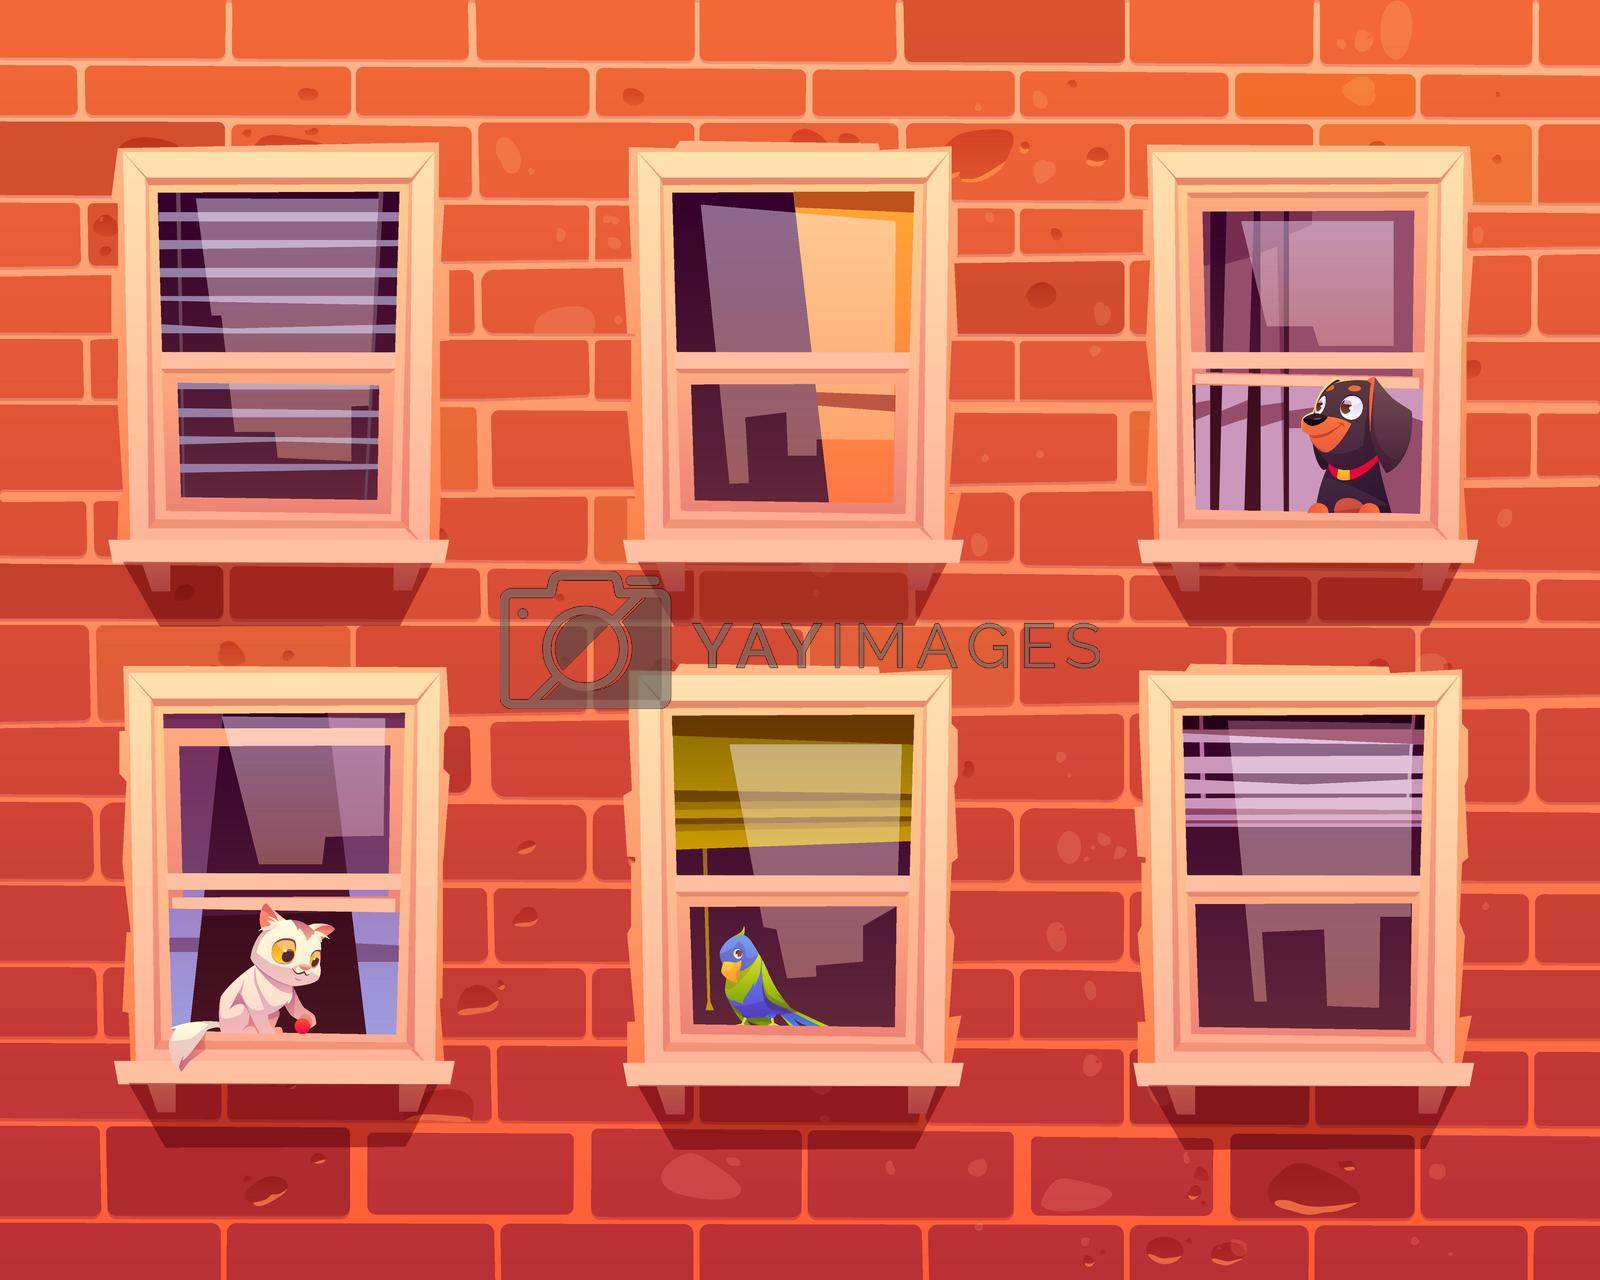 Pets in windows, cat, dog and parrot sit on windowsills inside of room looking out. Brick wall facade front view with cute kitten with toy, puppy and bird. Domestic animals Cartoon vector illustration